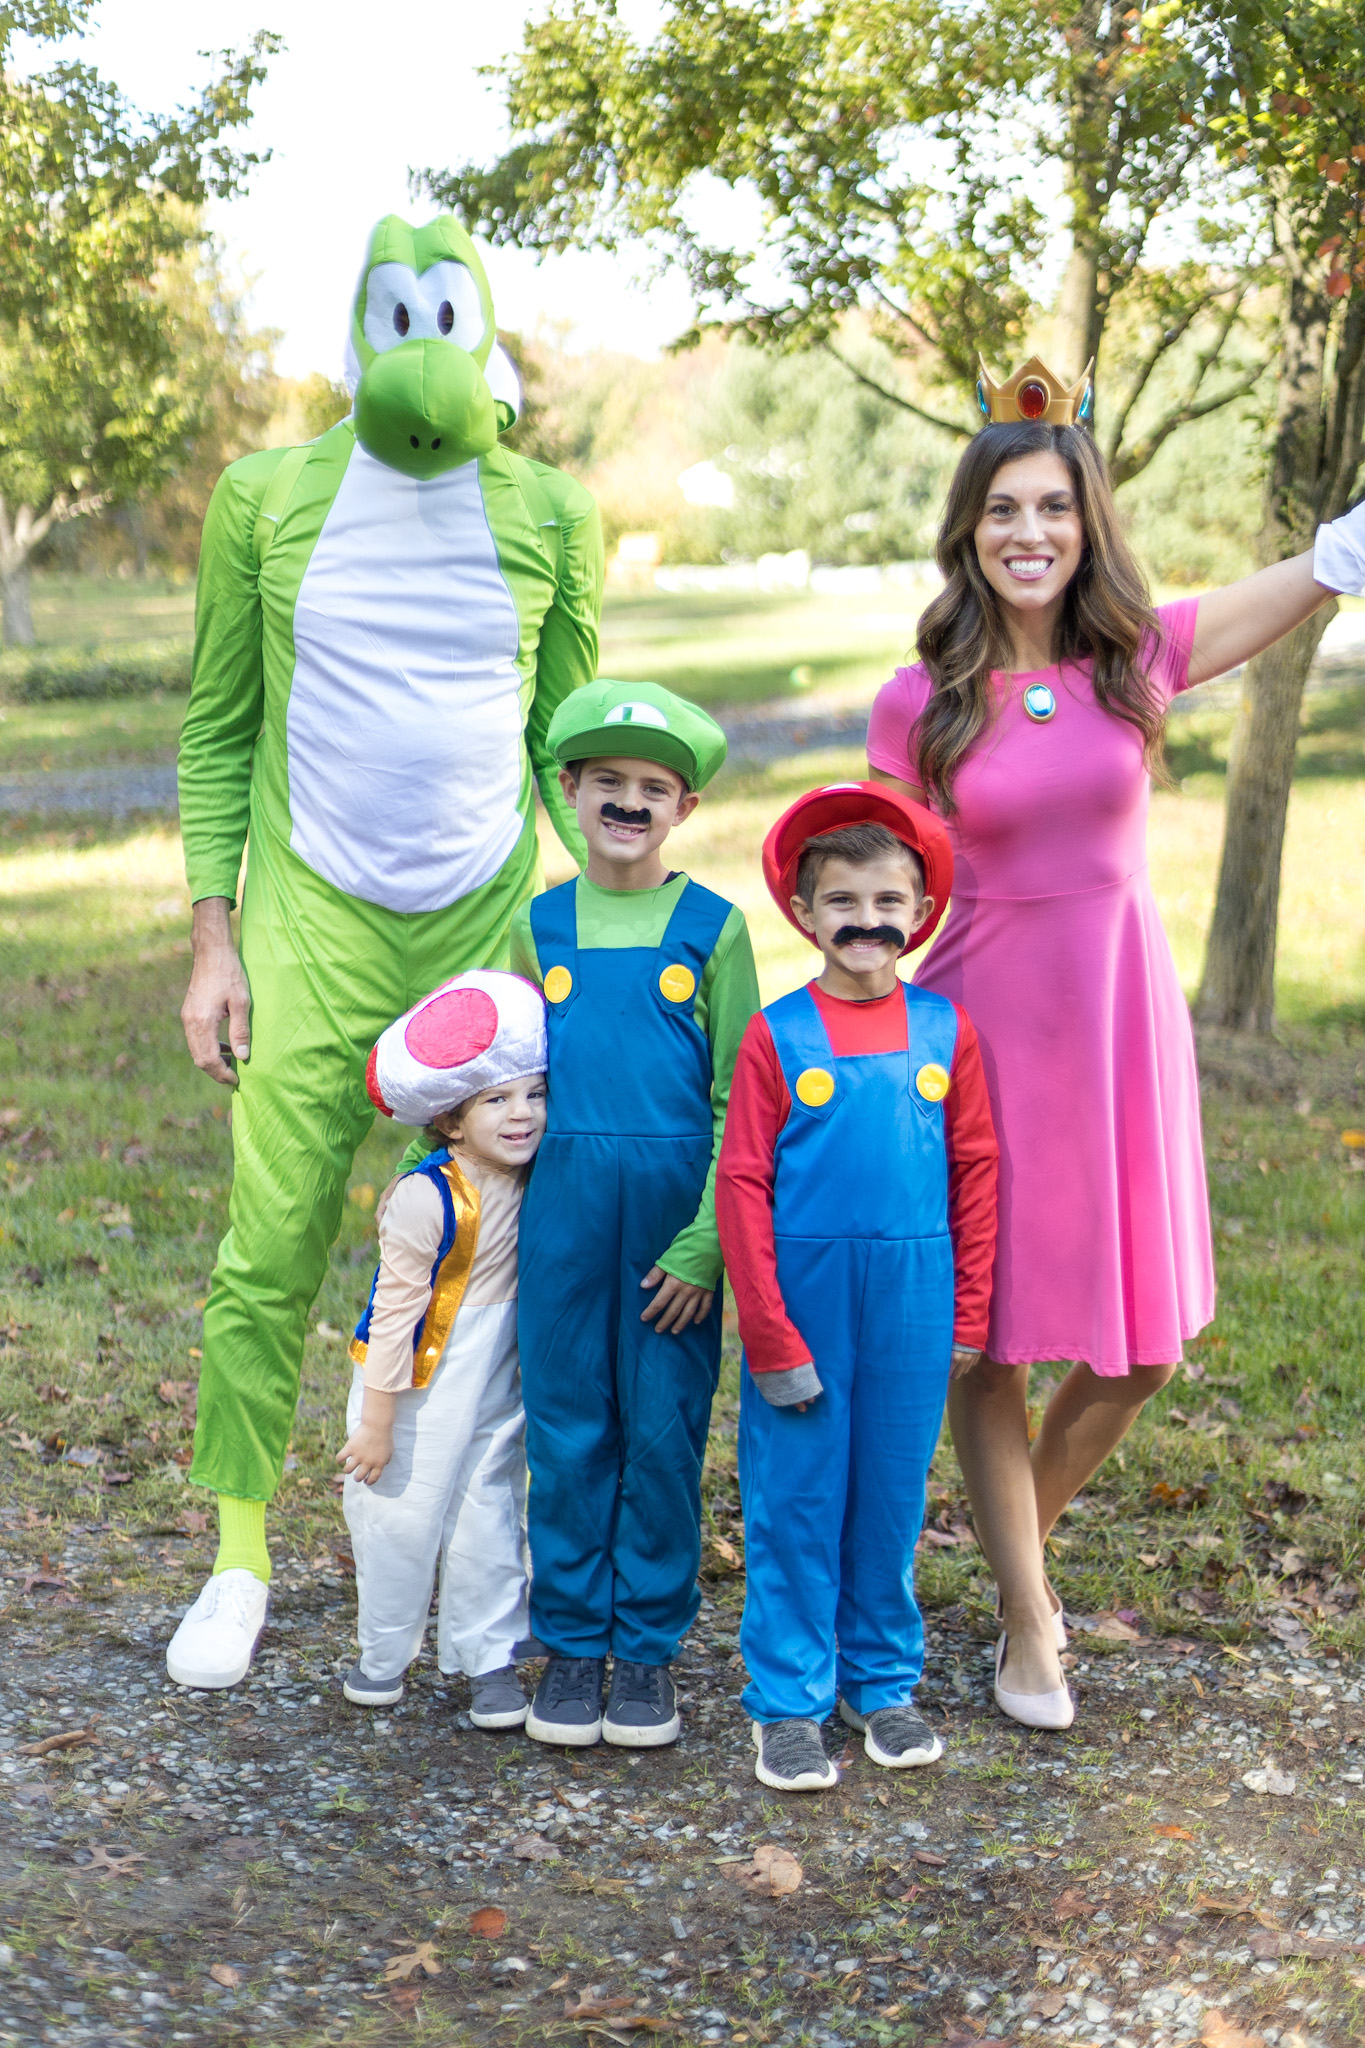 Super Mario Brothers Costumes - Beautifully Candid